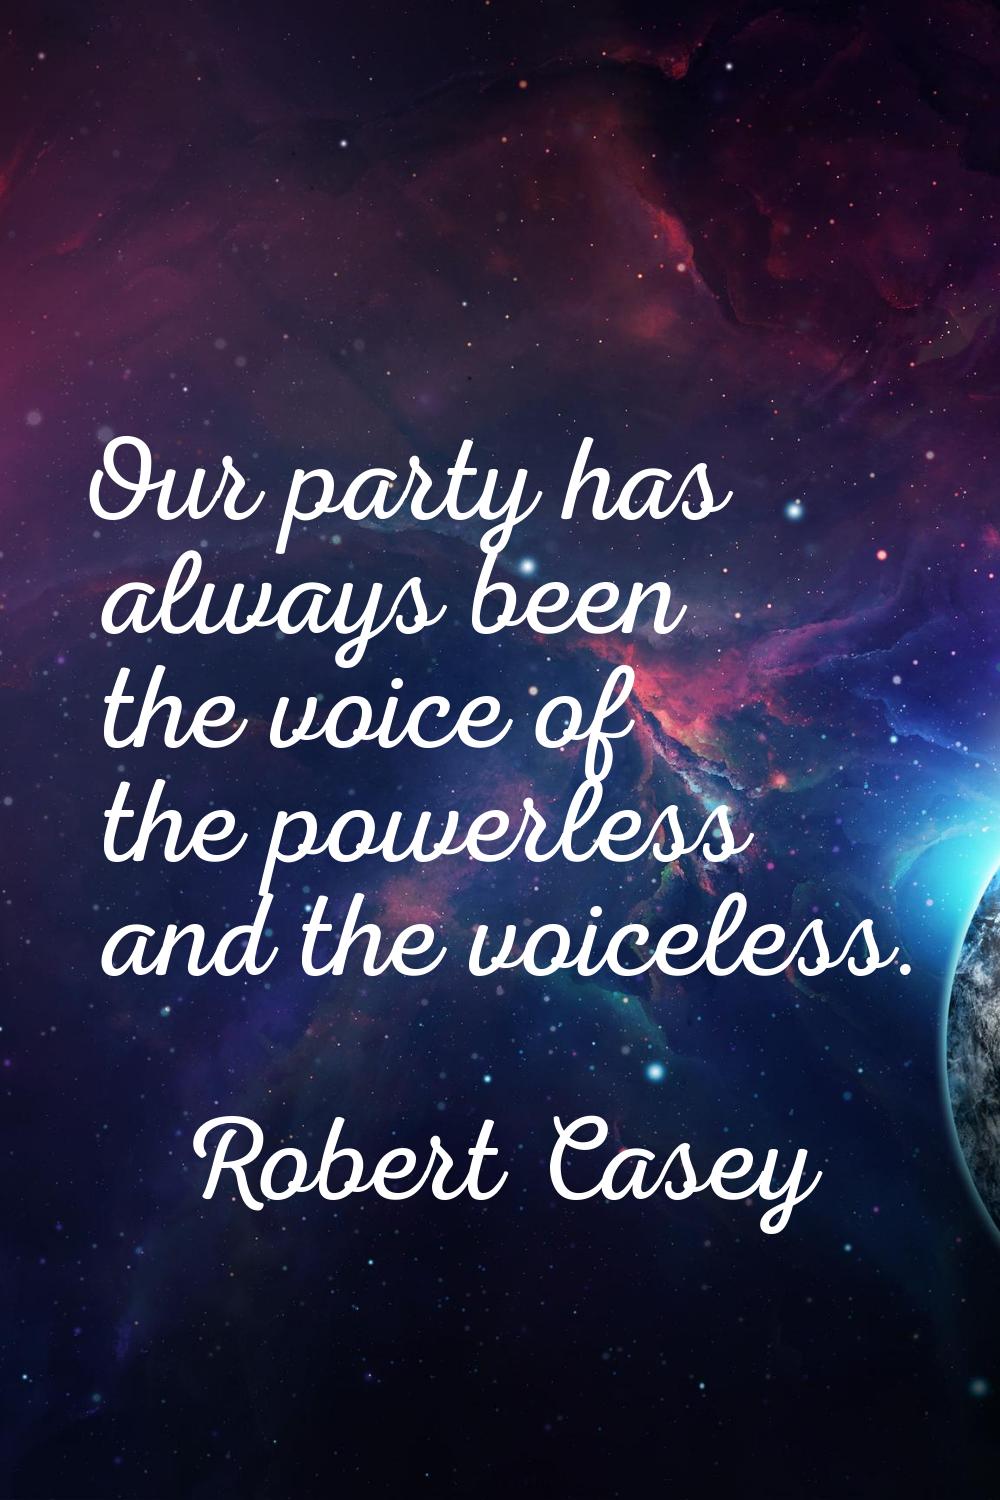 Our party has always been the voice of the powerless and the voiceless.